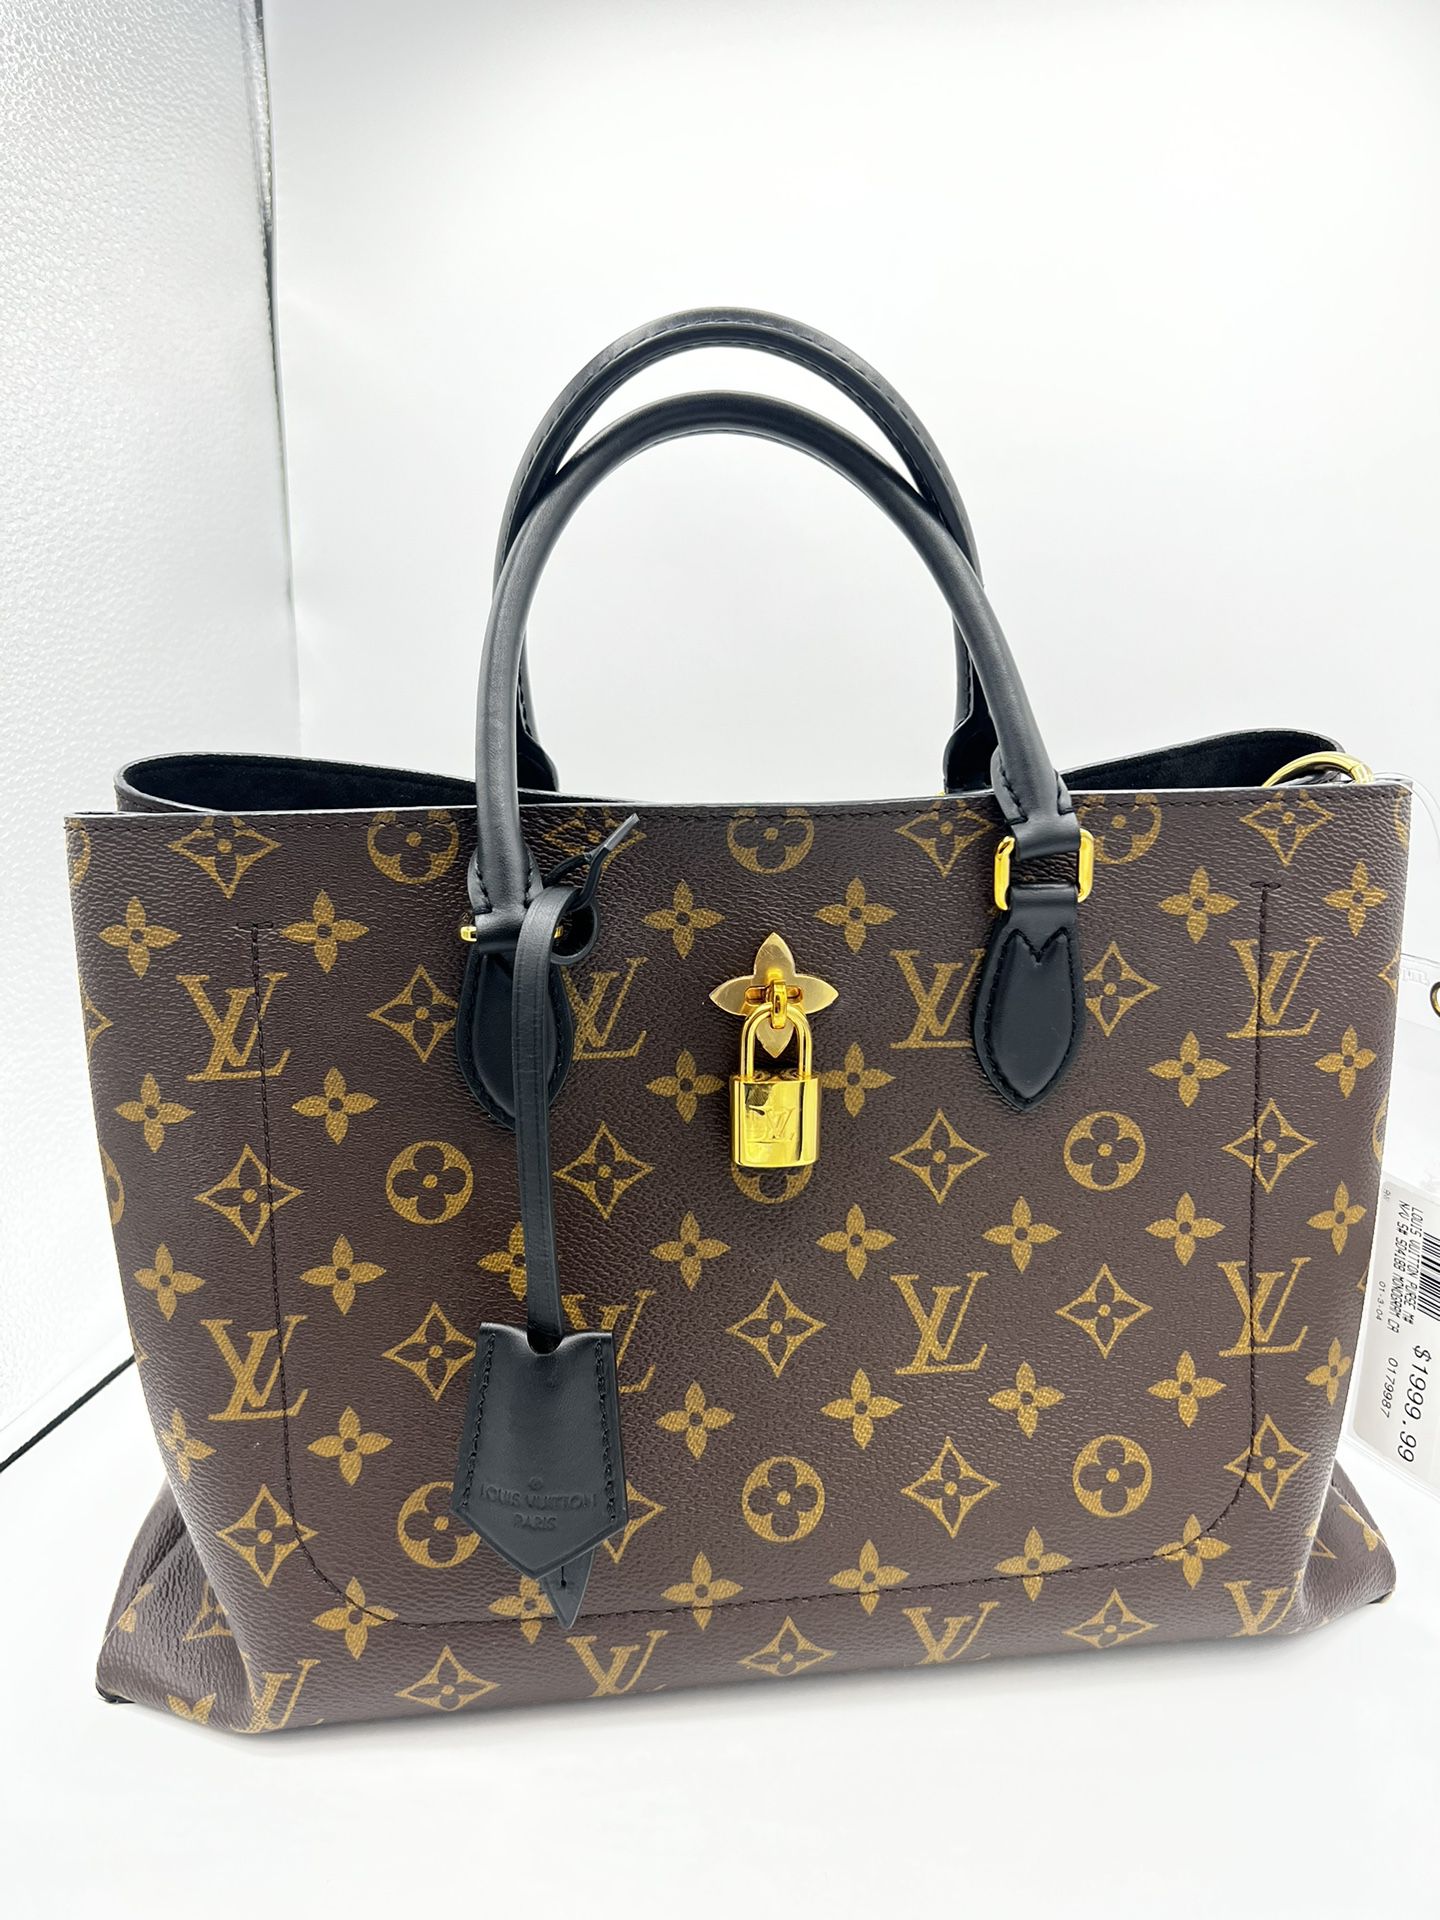 Louis Vuitton for Sale in Spring, TX - OfferUp